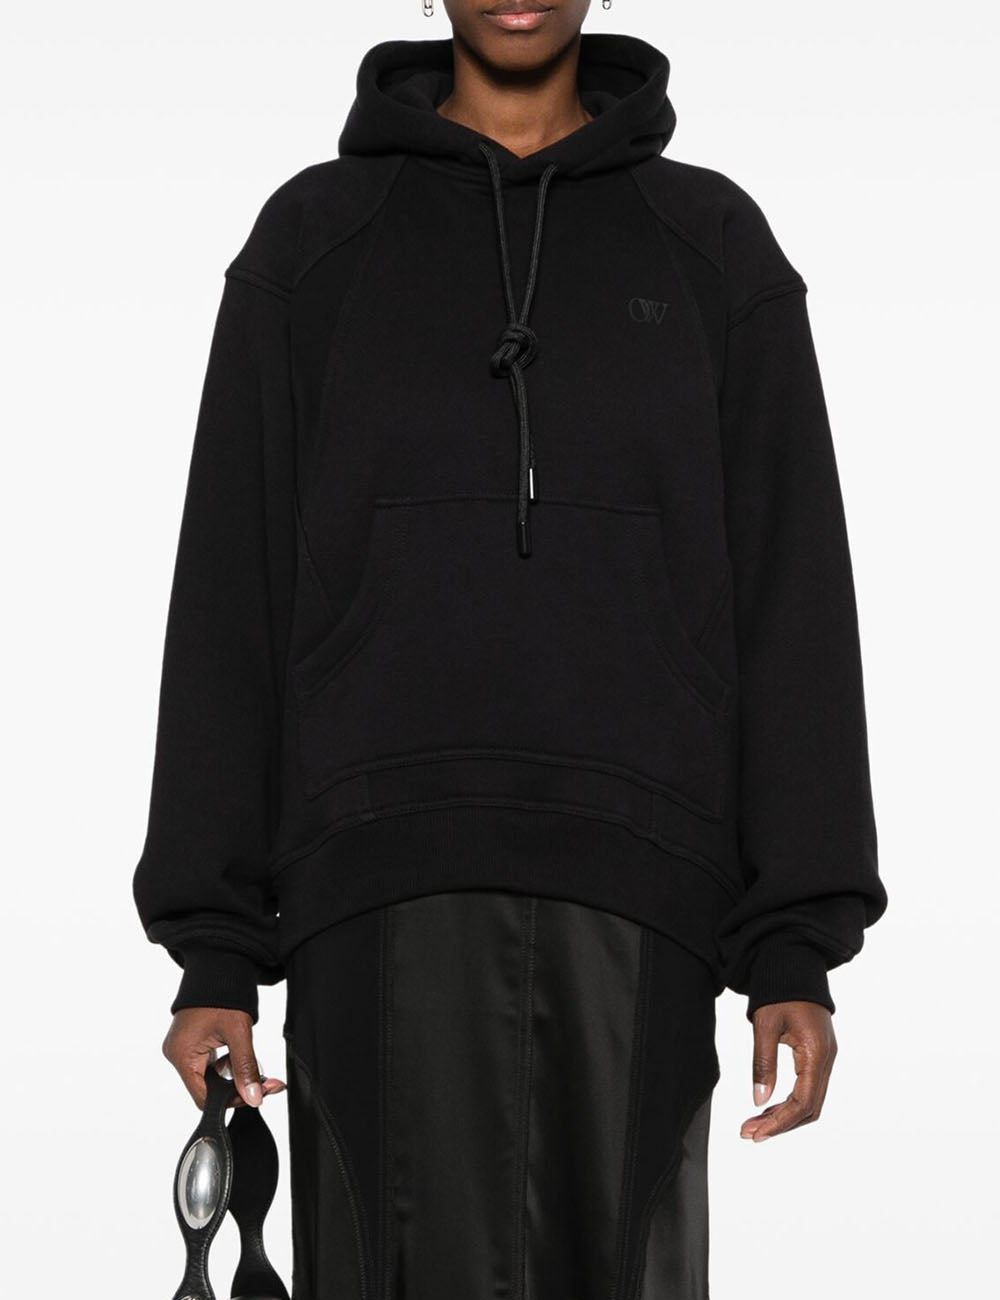 OFF WHITE SATIN JER CYCL HOODIE